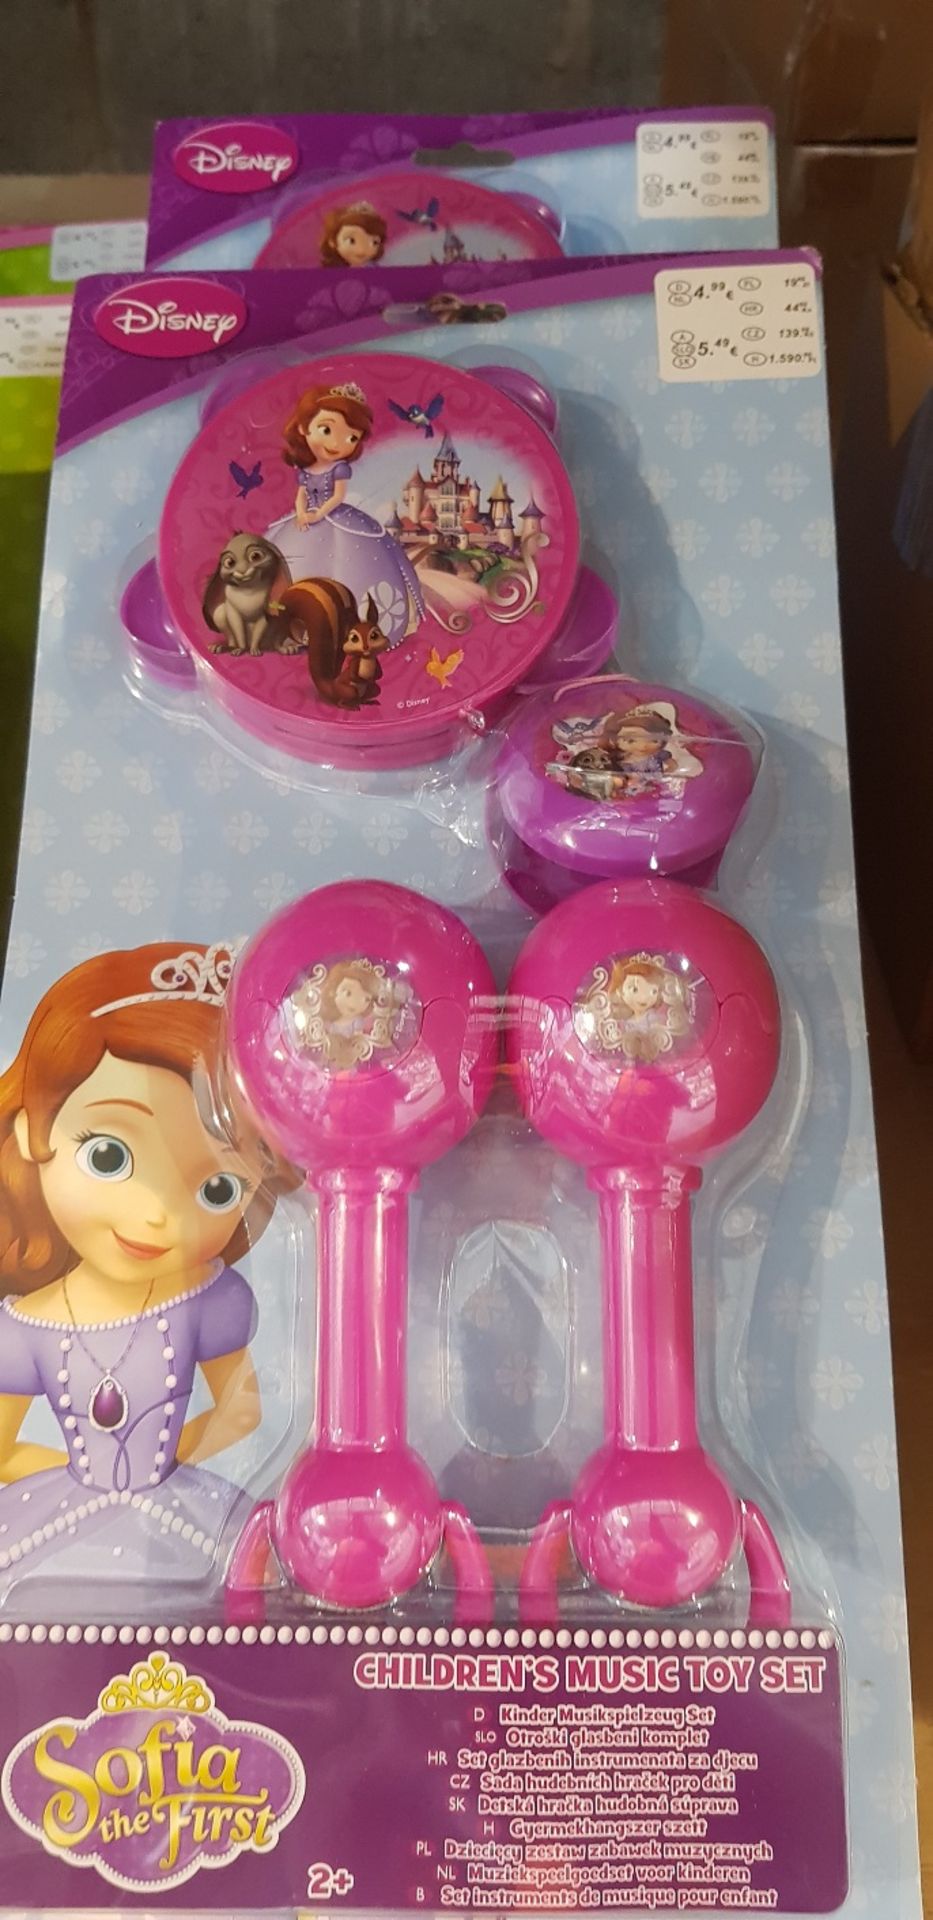 6 PACKS OF SOFIA THE FIRST CHILDREN RATTLES AND MUSICAL INSTUMENTS